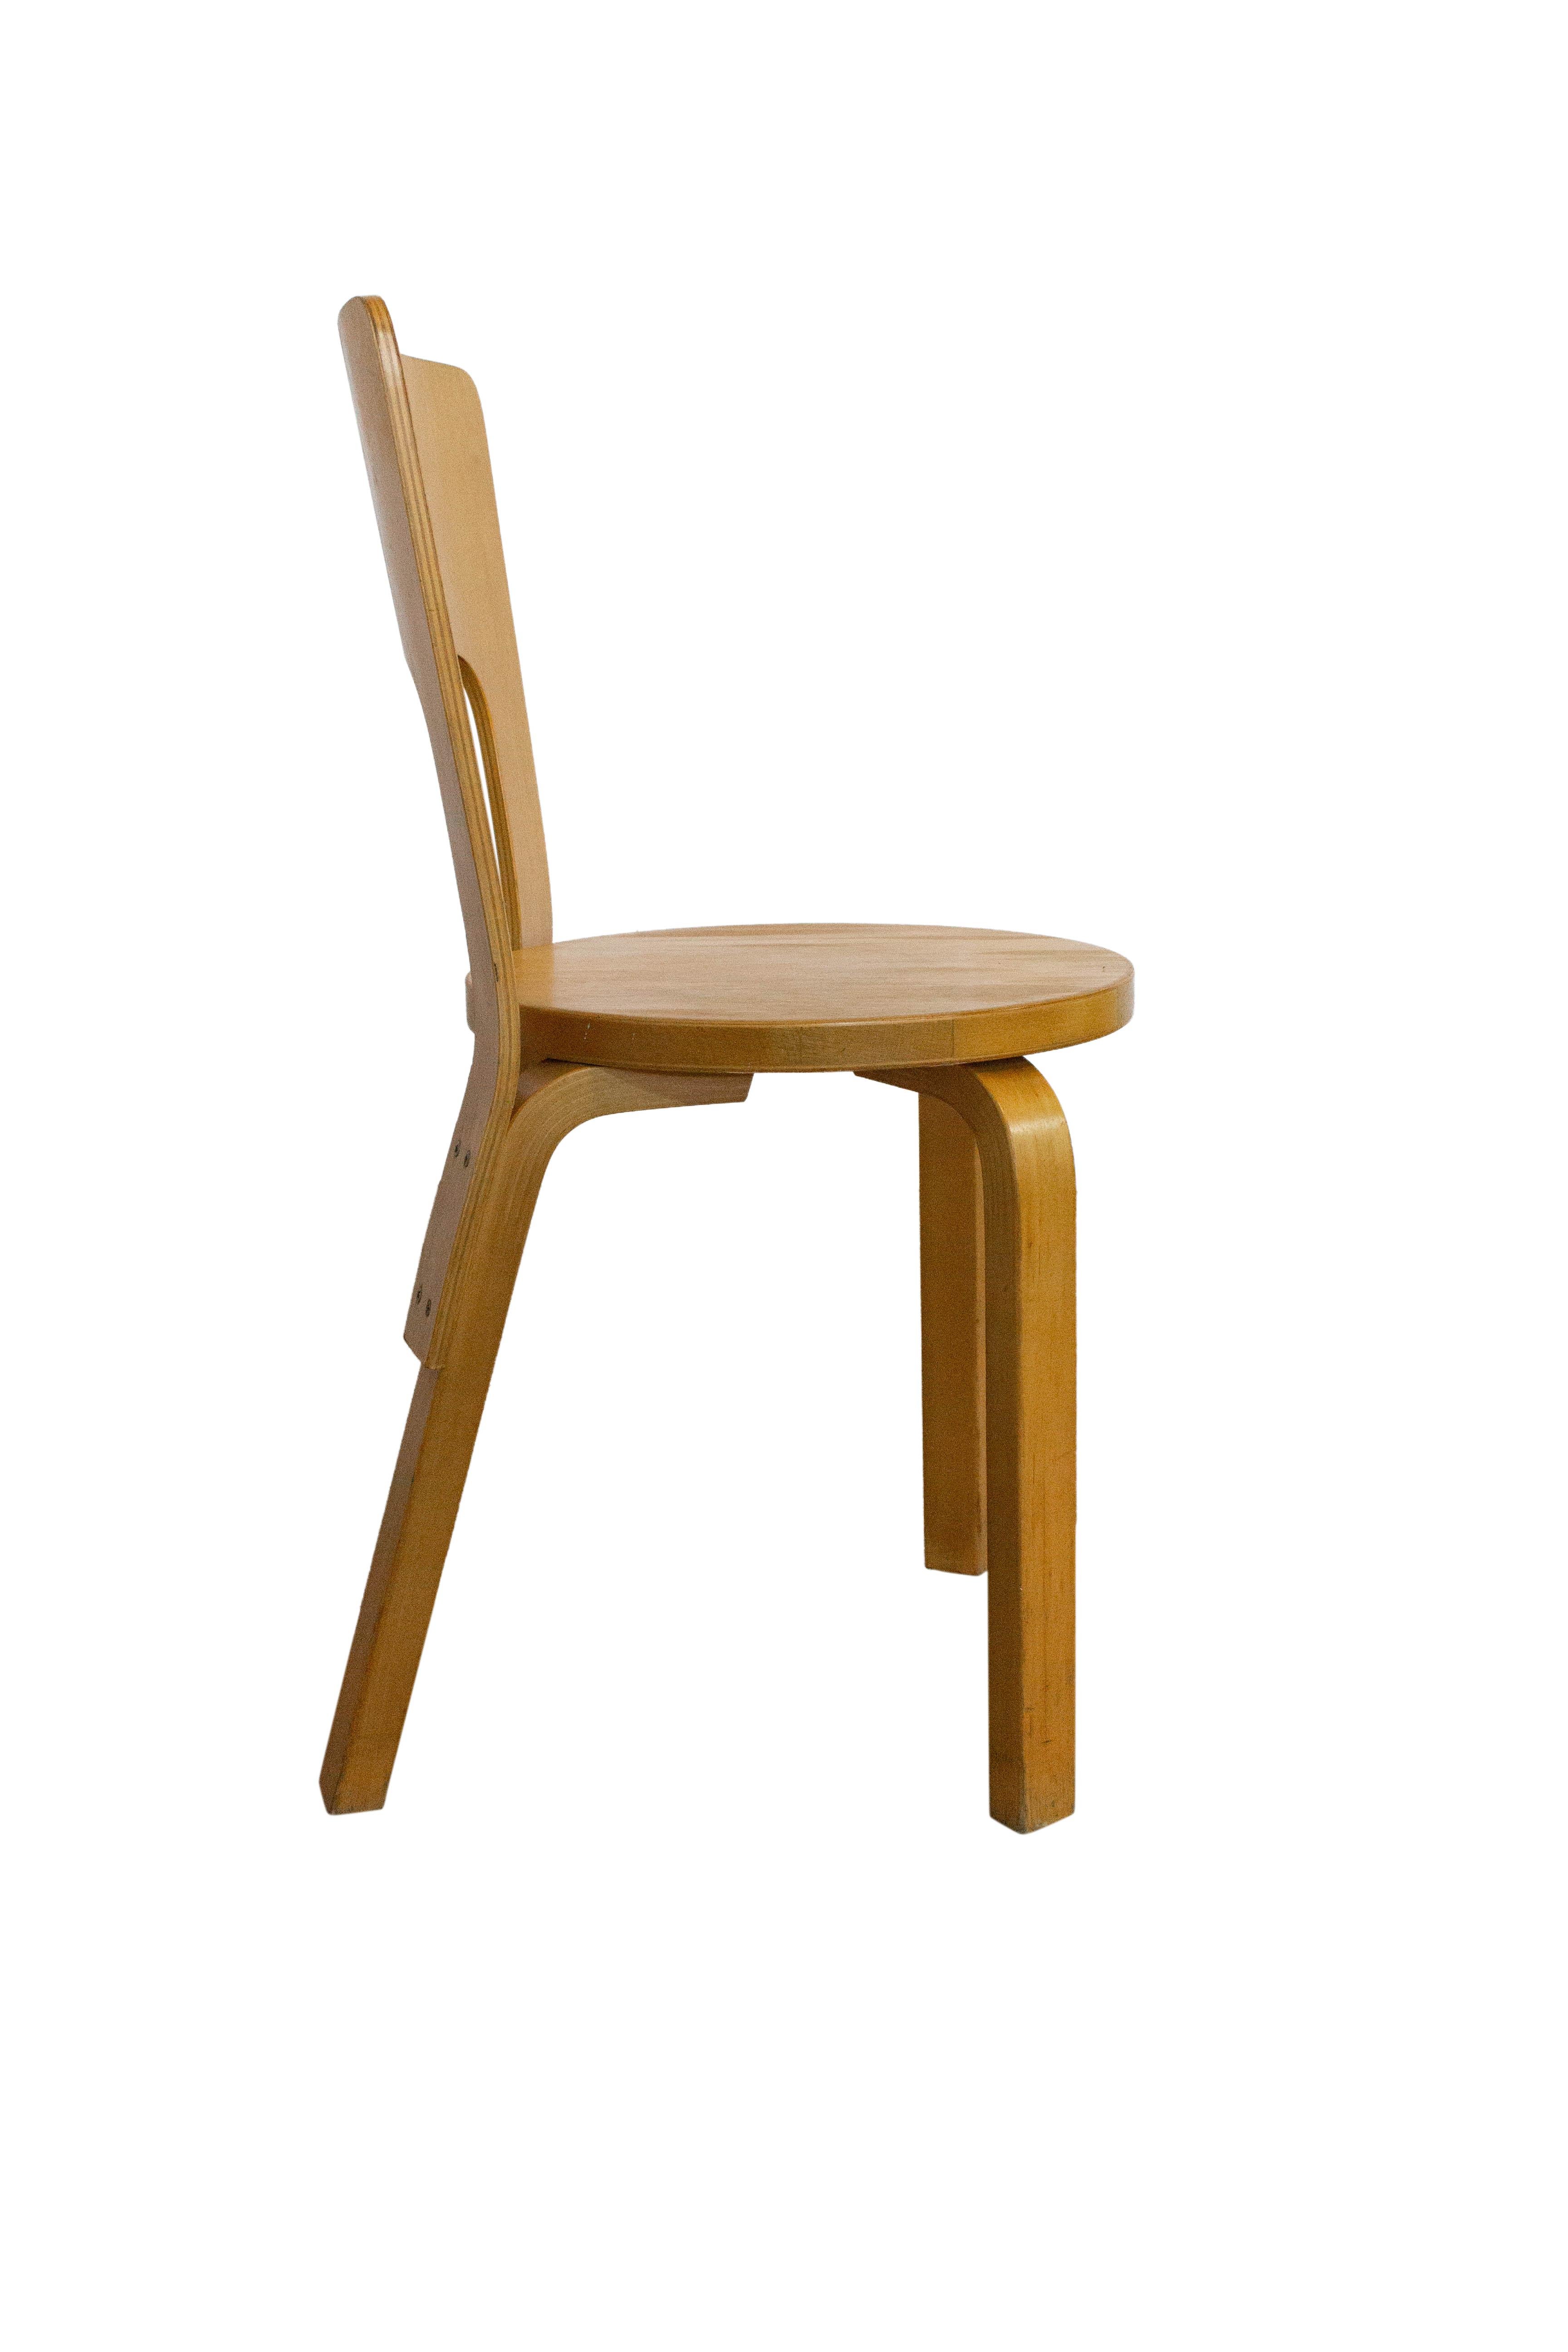 Chair Alvar Aalto model 66 Finnish vintage wood chair, circa 1930
Conception in 1933 for Artek manufacture
Suitable with 1950 or Scandinavian furniture
Alvo Aarto was a Finnish architect and designer
Original vintage condition
Sound and solid.

   